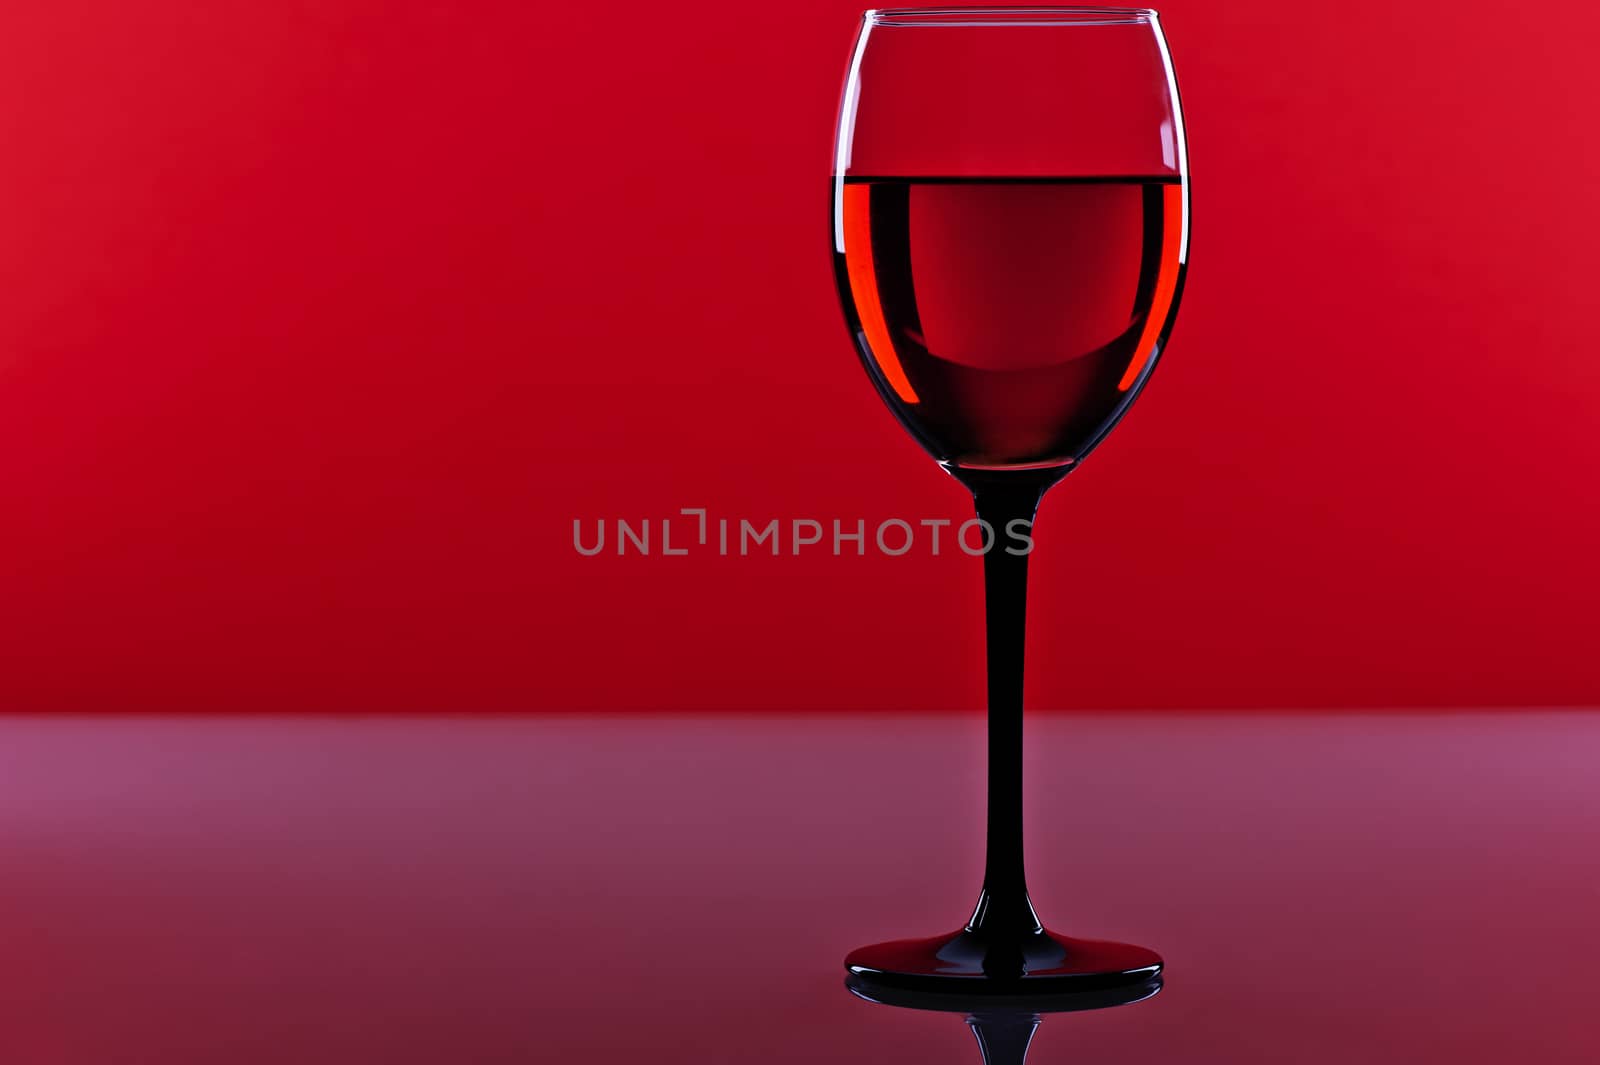 Glass of red french wine on a red background